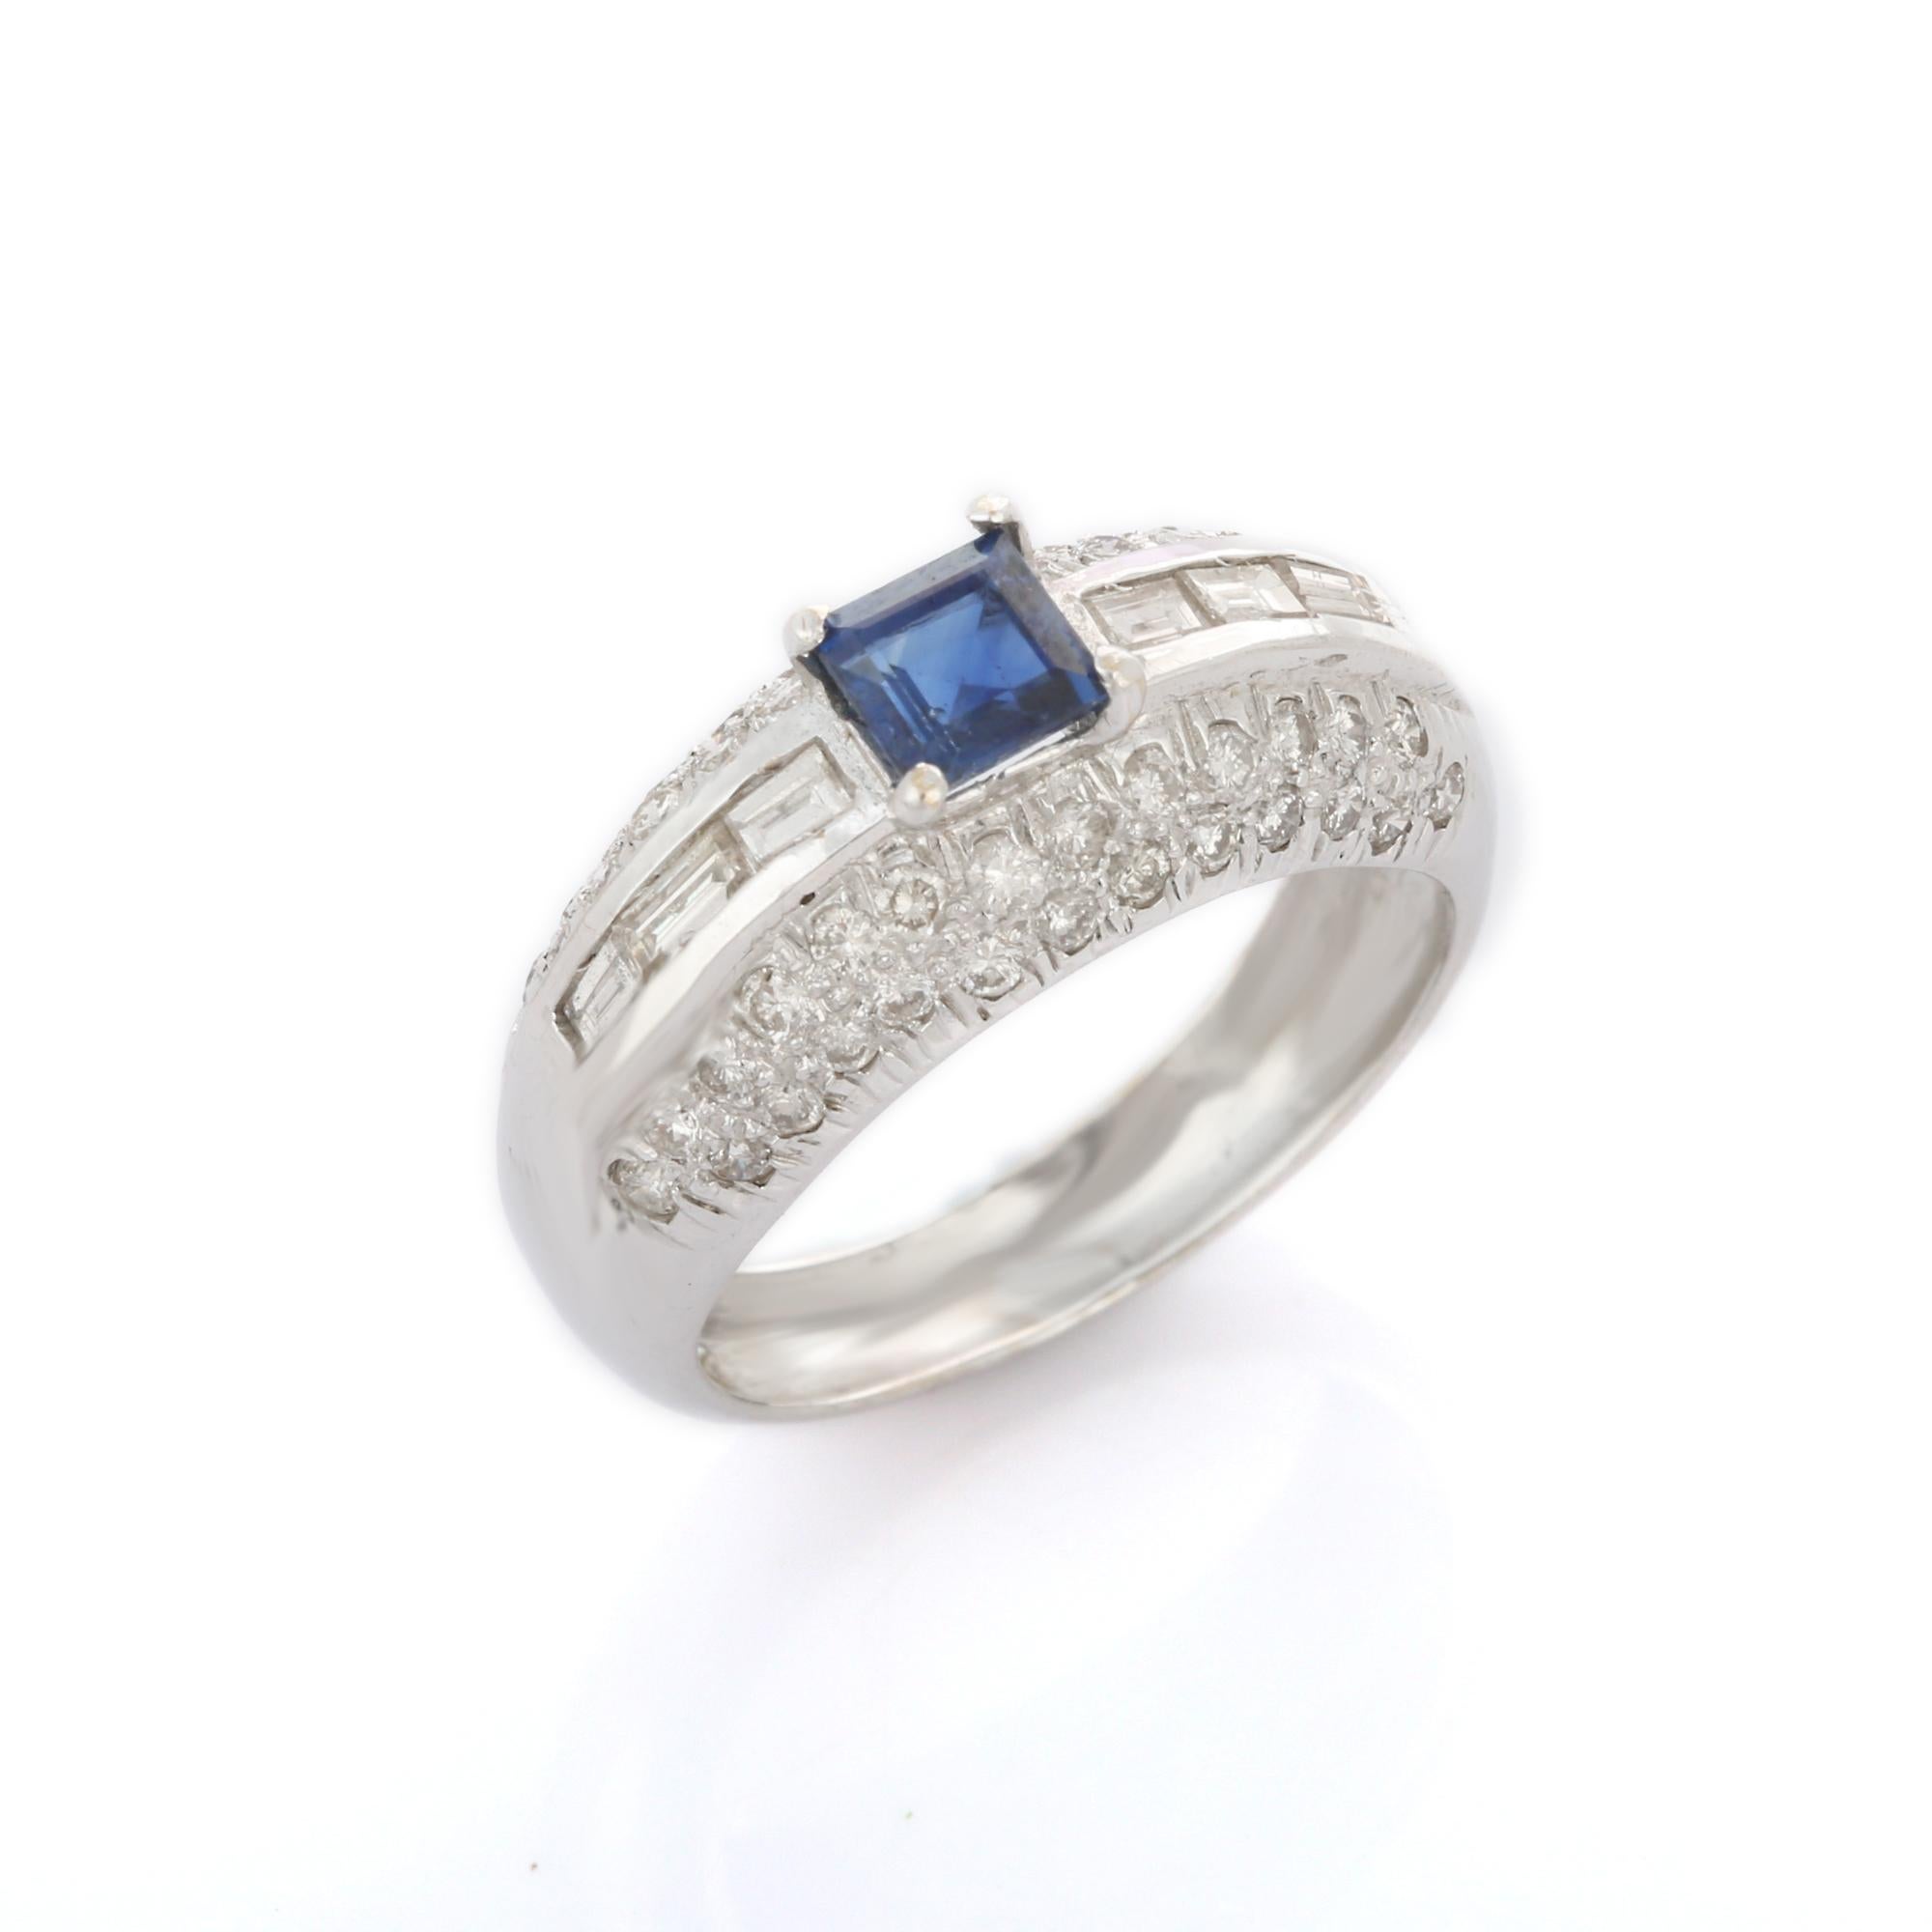 For Sale:  18K White Gold Square Cut Blue Sapphire and Diamonds Cocktail Ring 5